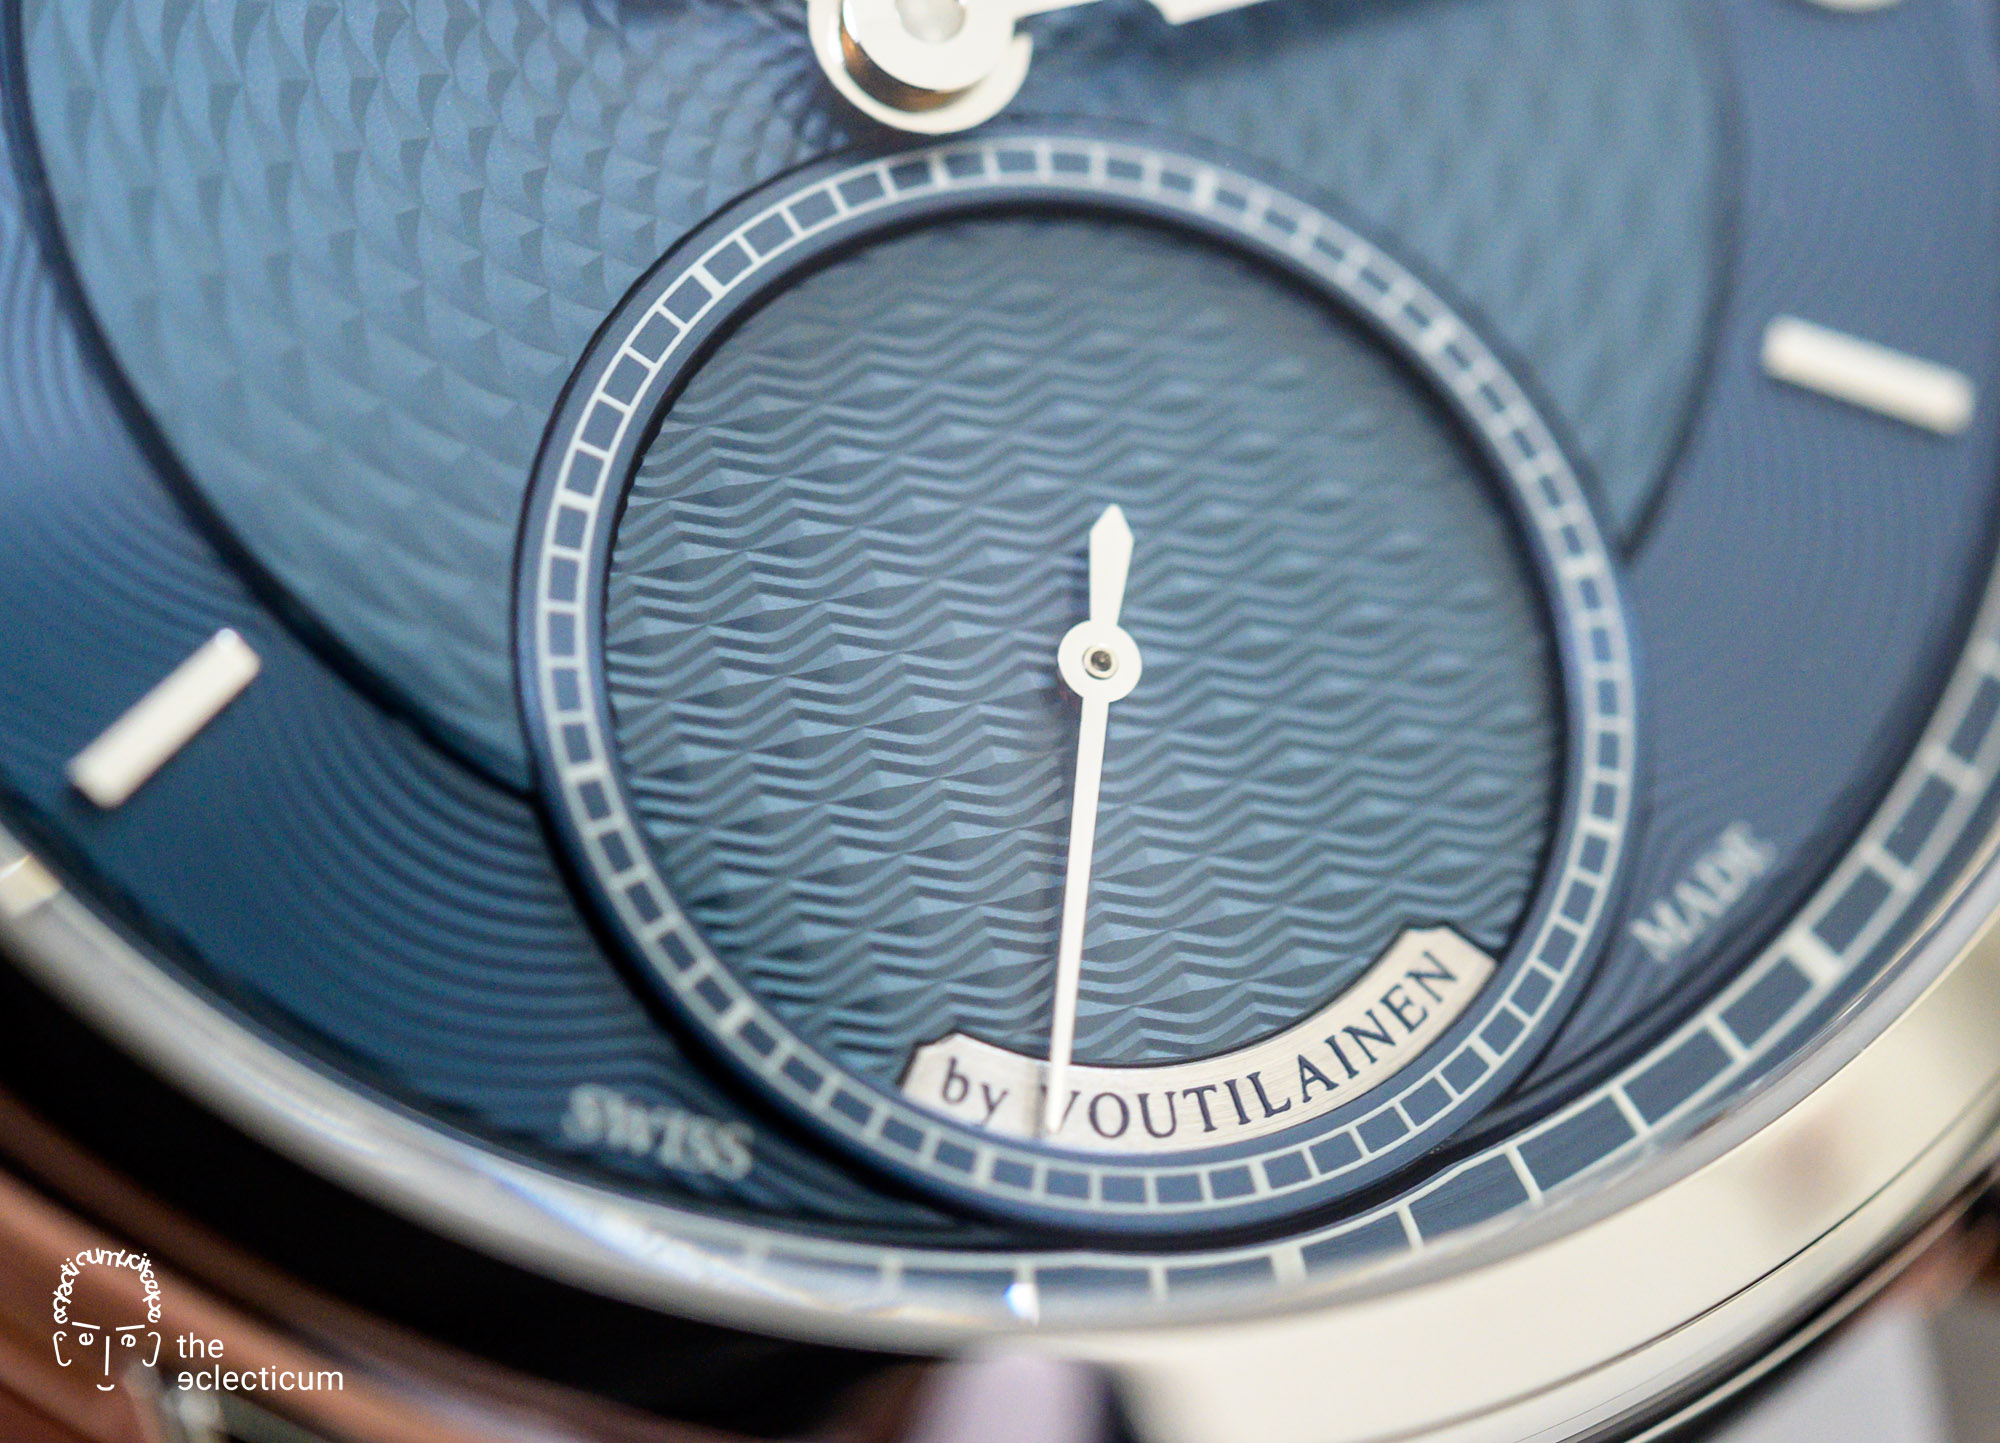 Schwarz Etienne Roma Synergy by Kari Voutilainen guilloche micro-rotor manufacture